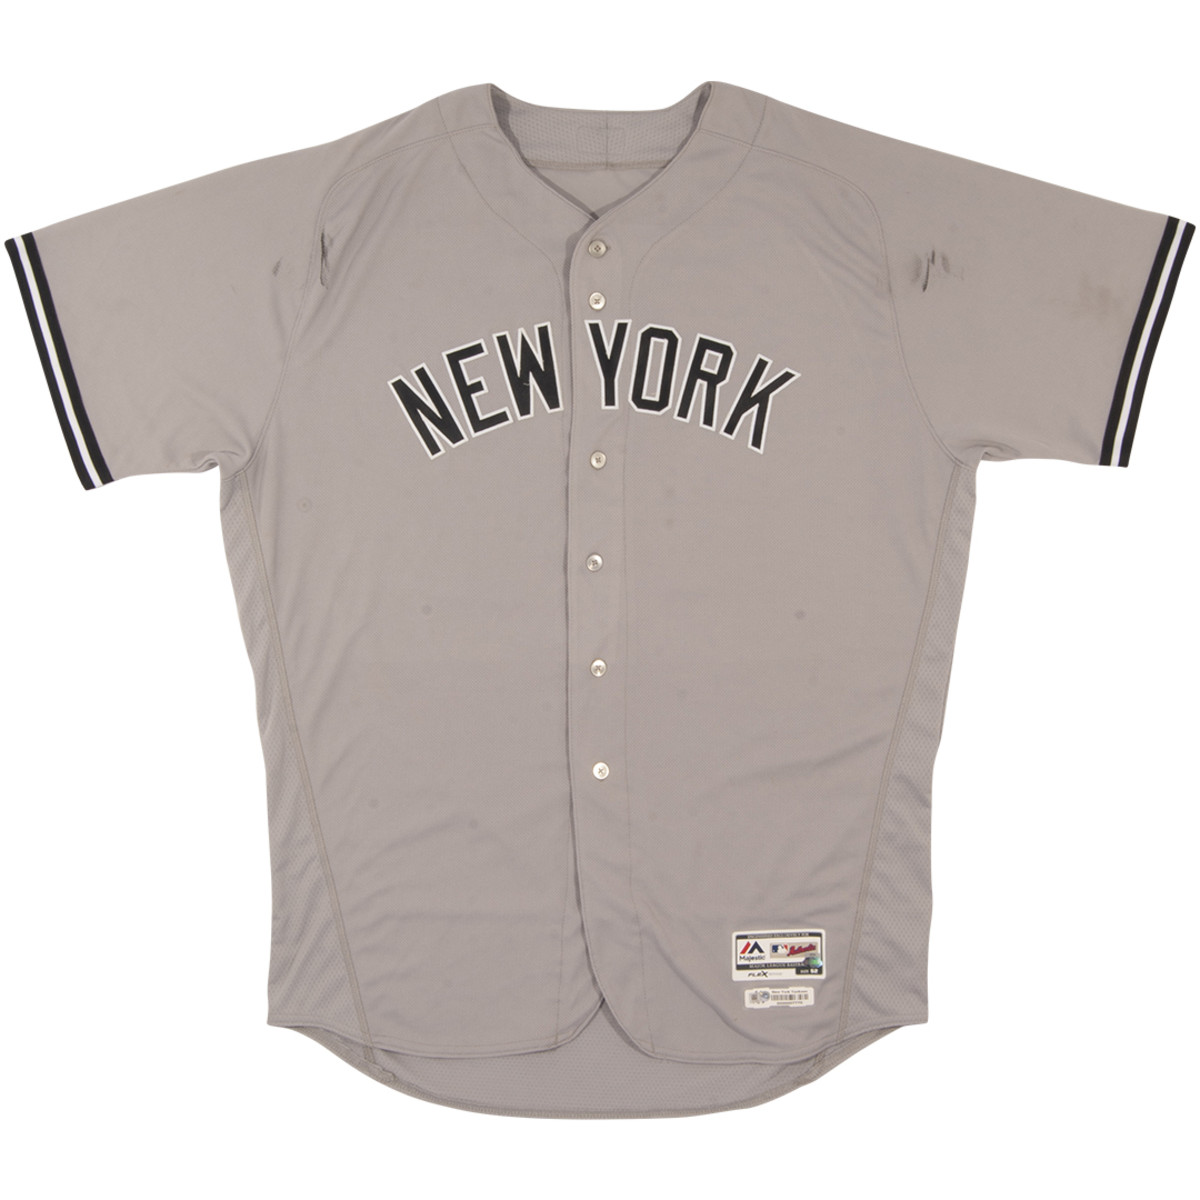 Game-worn Aaron Judge jersey from opening day of his 2017 rookie season.